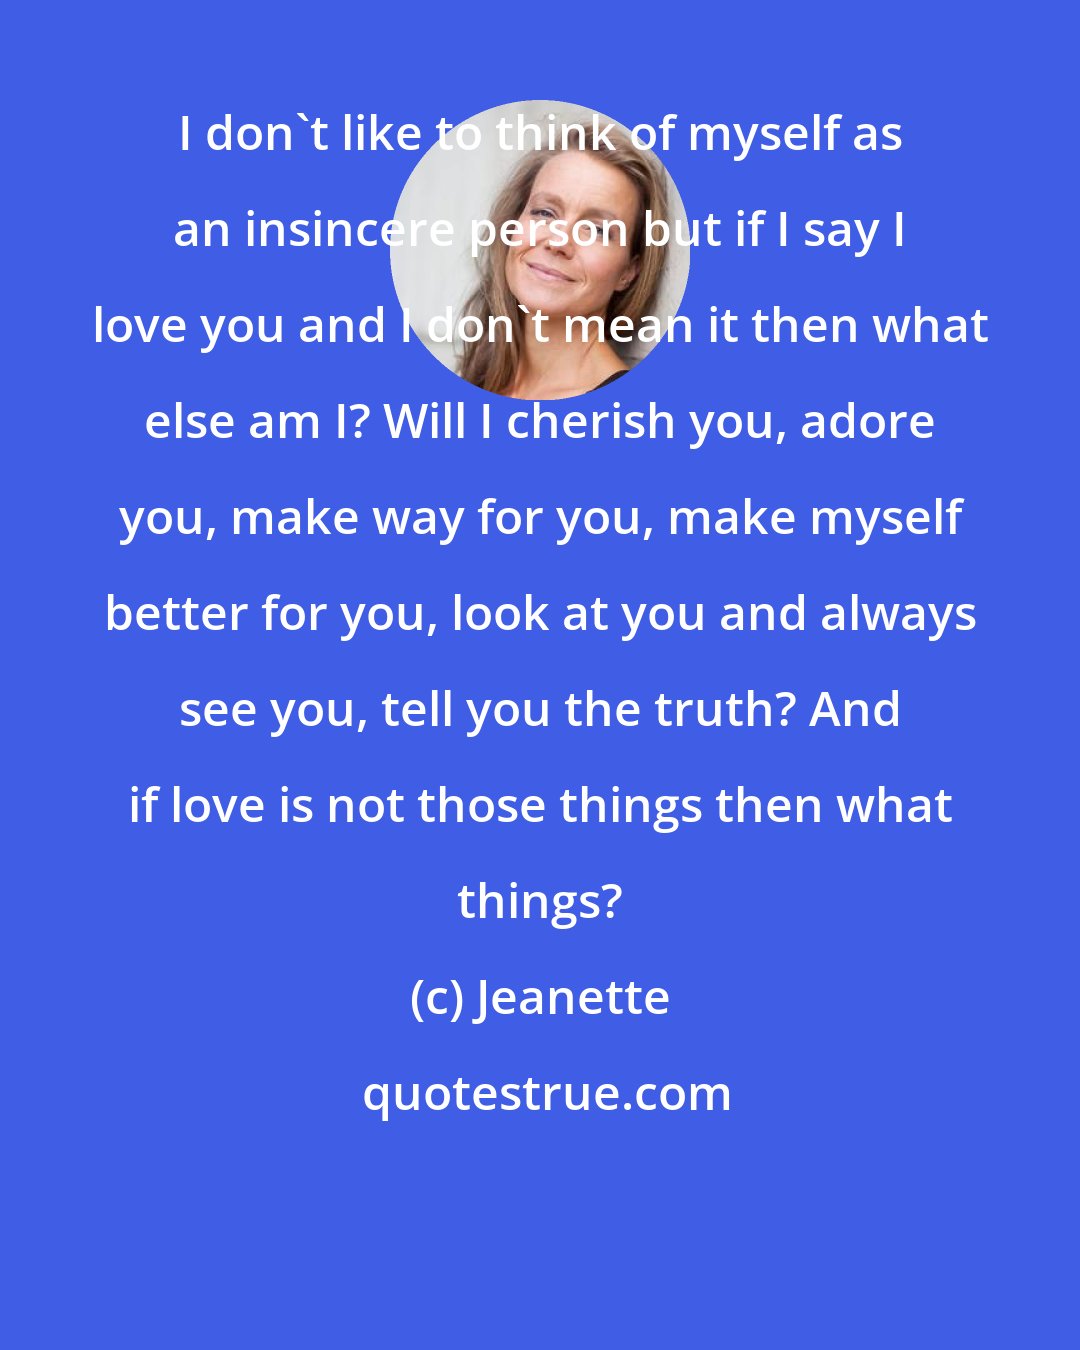 Jeanette: I don't like to think of myself as an insincere person but if I say I love you and I don't mean it then what else am I? Will I cherish you, adore you, make way for you, make myself better for you, look at you and always see you, tell you the truth? And if love is not those things then what things?